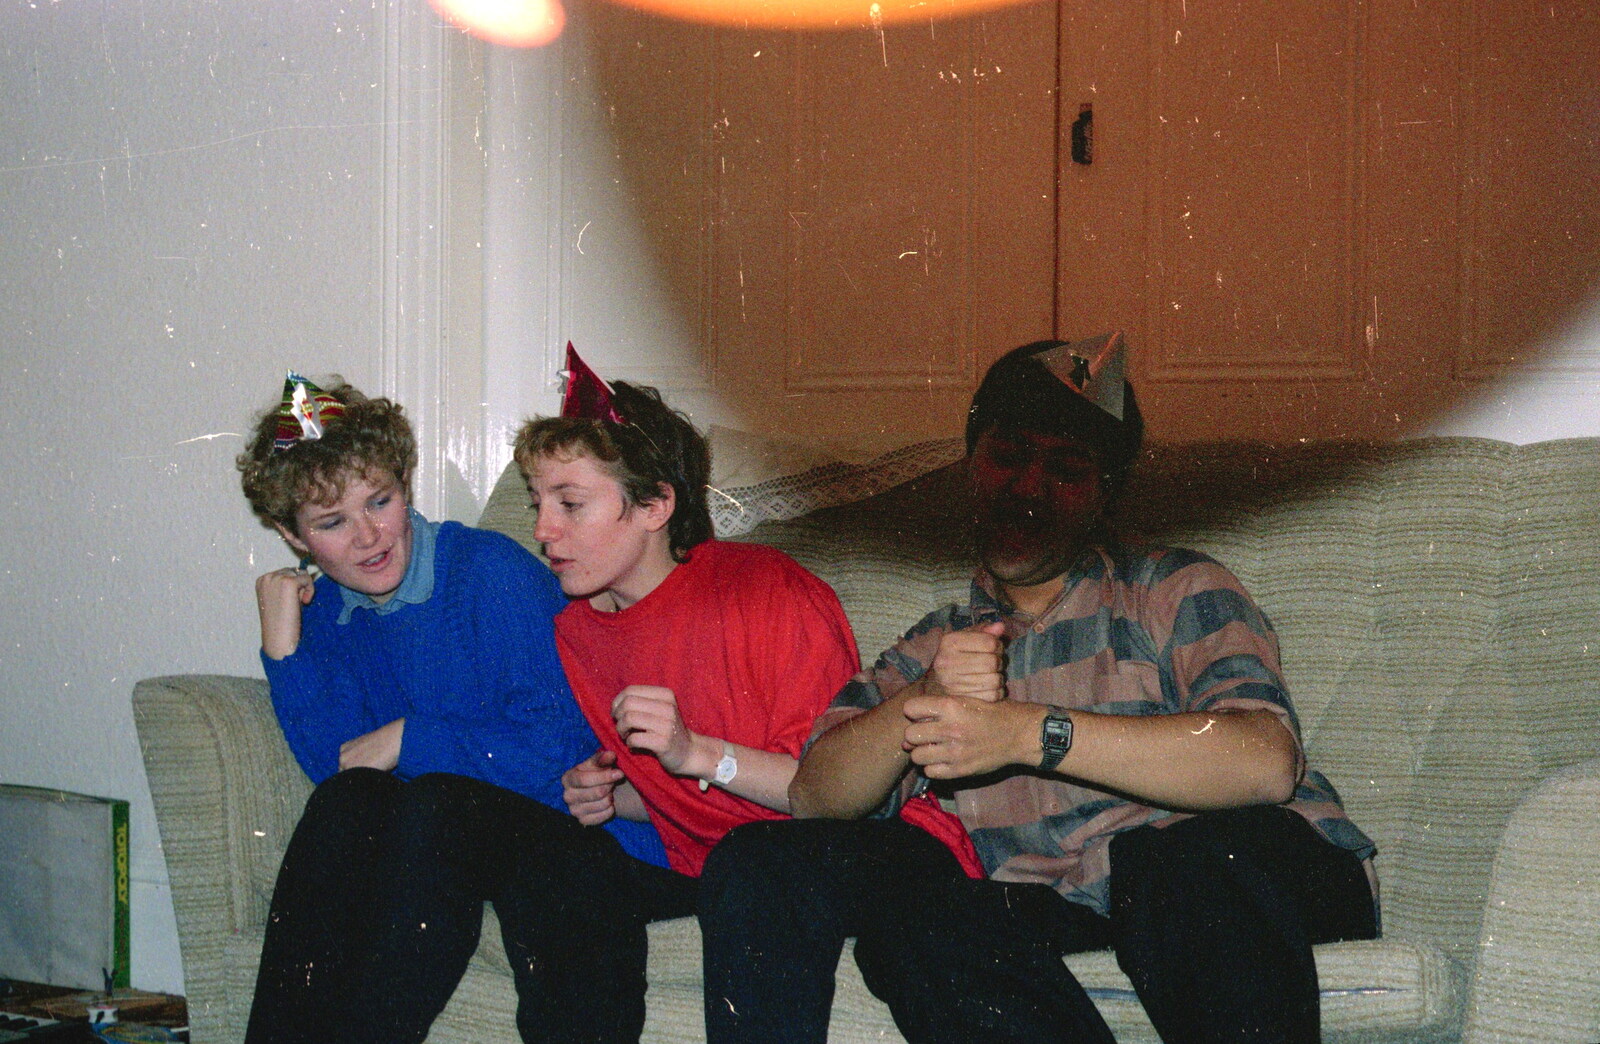 A bit of couch dancing from Uni: BABS Christmas Ball and a Beaumont Street Party, Plymouth - 16th December 1985